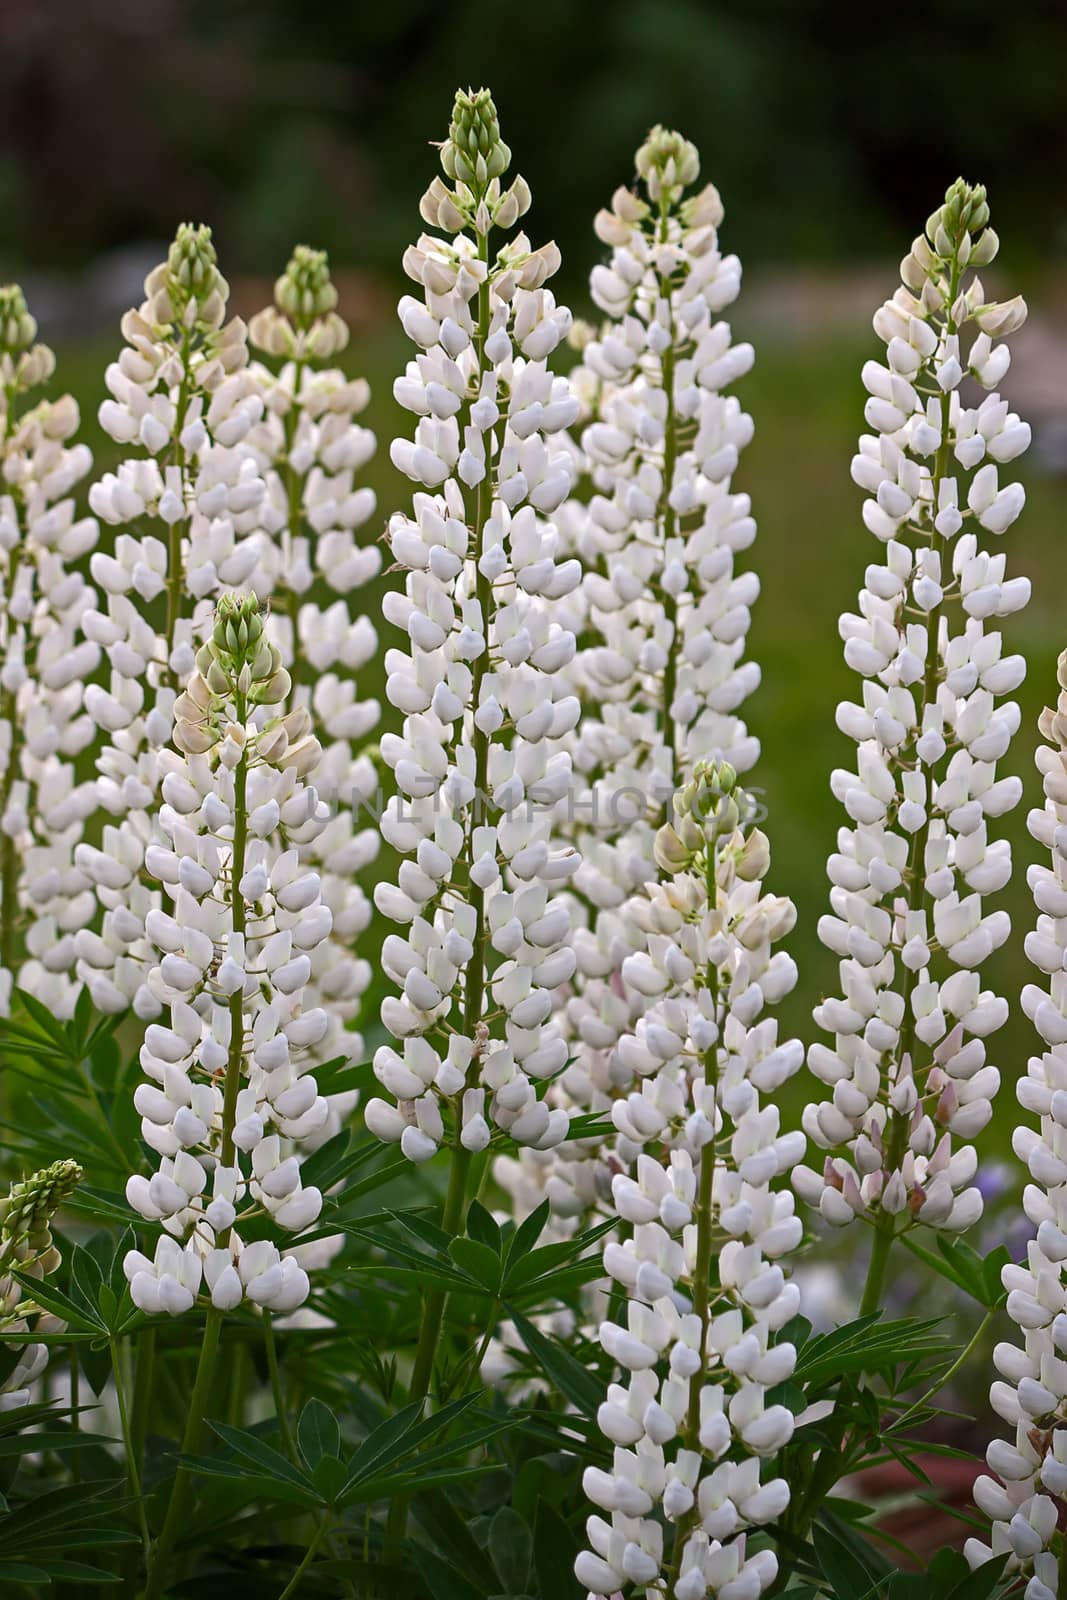 Many white flowers of lupine. Image with shallow depth of field.